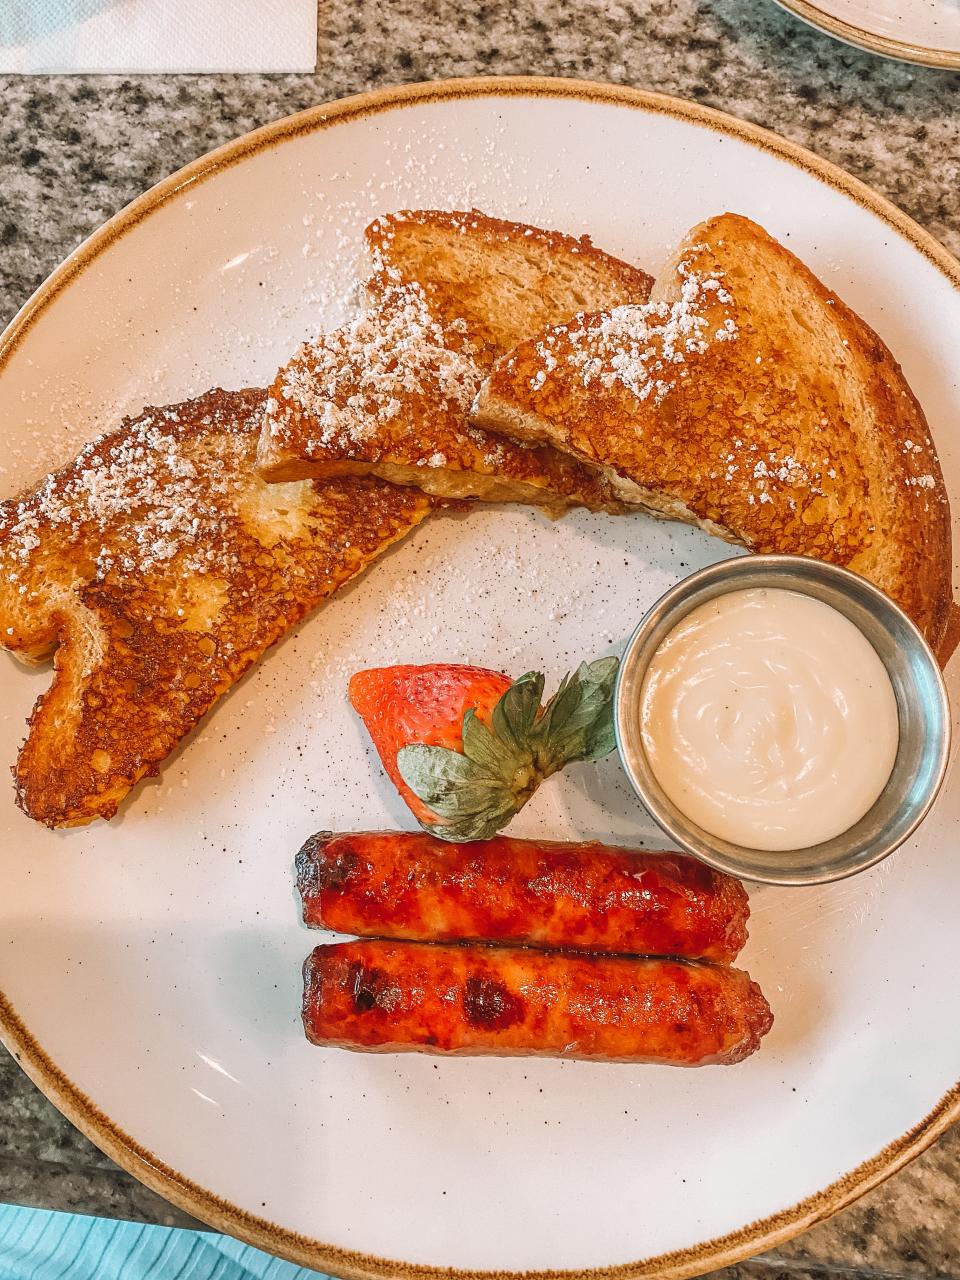 plated french toast from the grand floridian cafe